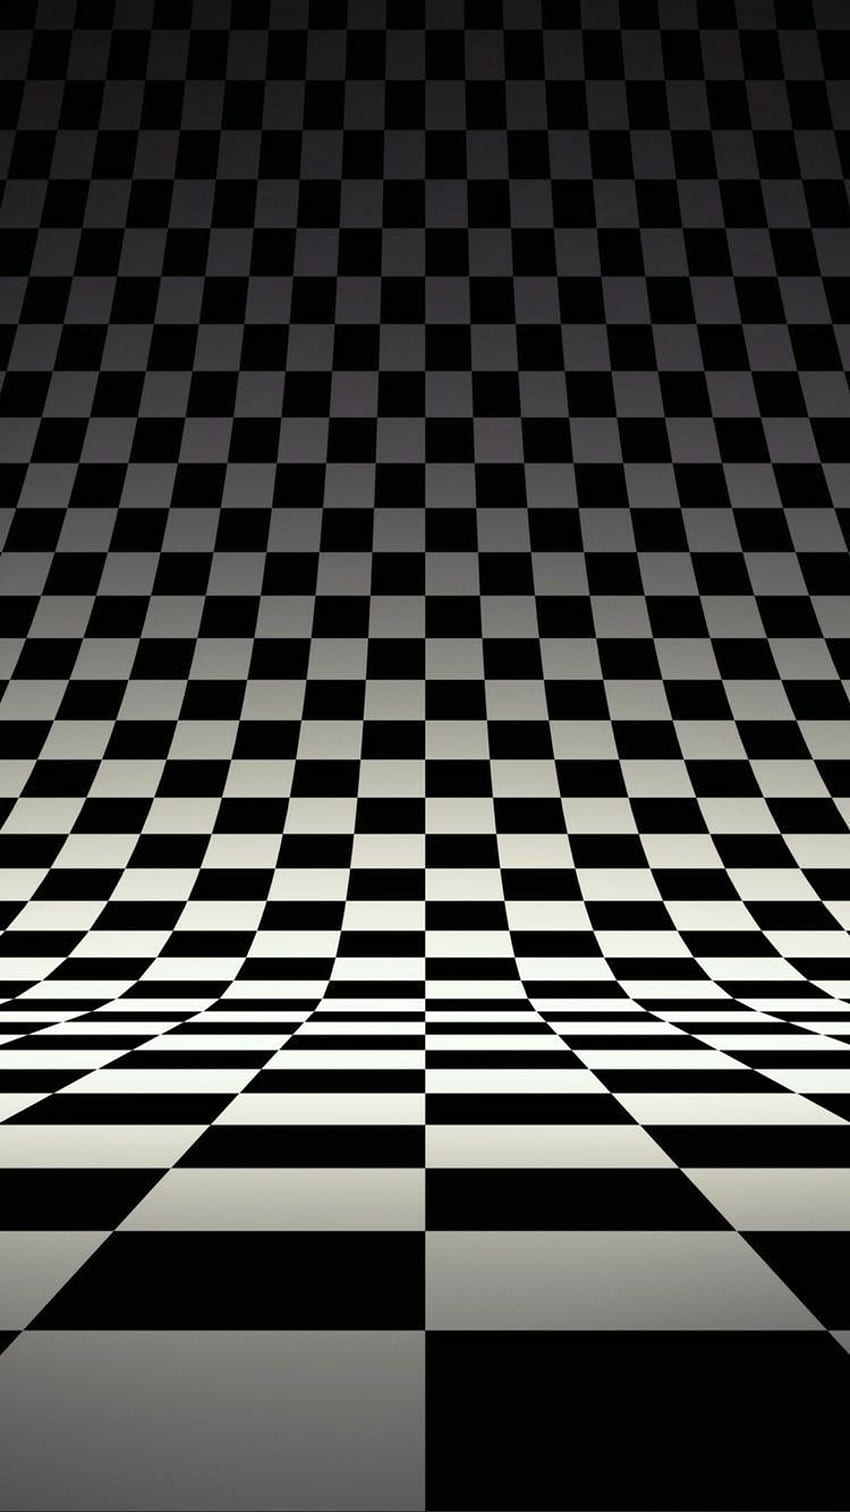 Download Optical Illusion Wallpaper APK 3.1 for Android - Filehippo.com